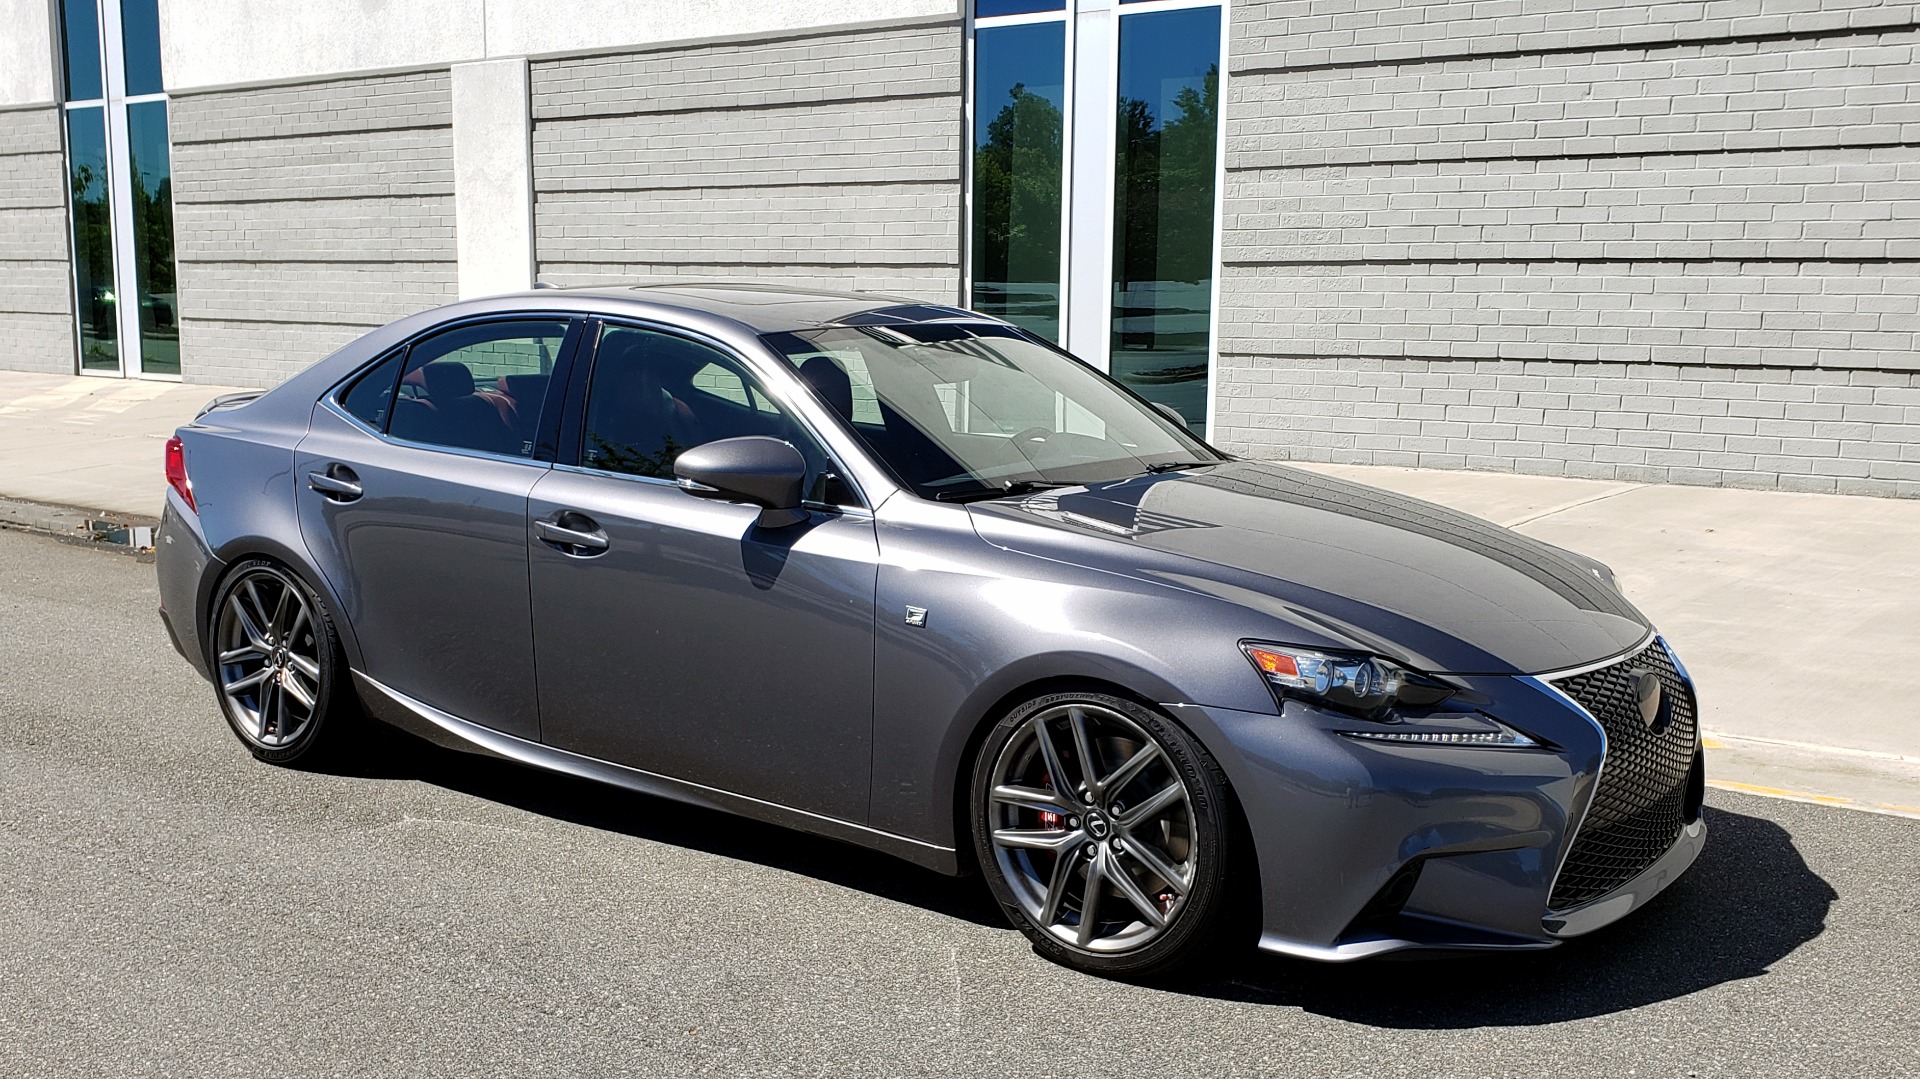 Used 2016 Lexus IS 200T F-SPORT SEDAN / SUNROOF / LCA / HTD & CLD SEATS / REARVIEW for sale Sold at Formula Imports in Charlotte NC 28227 14